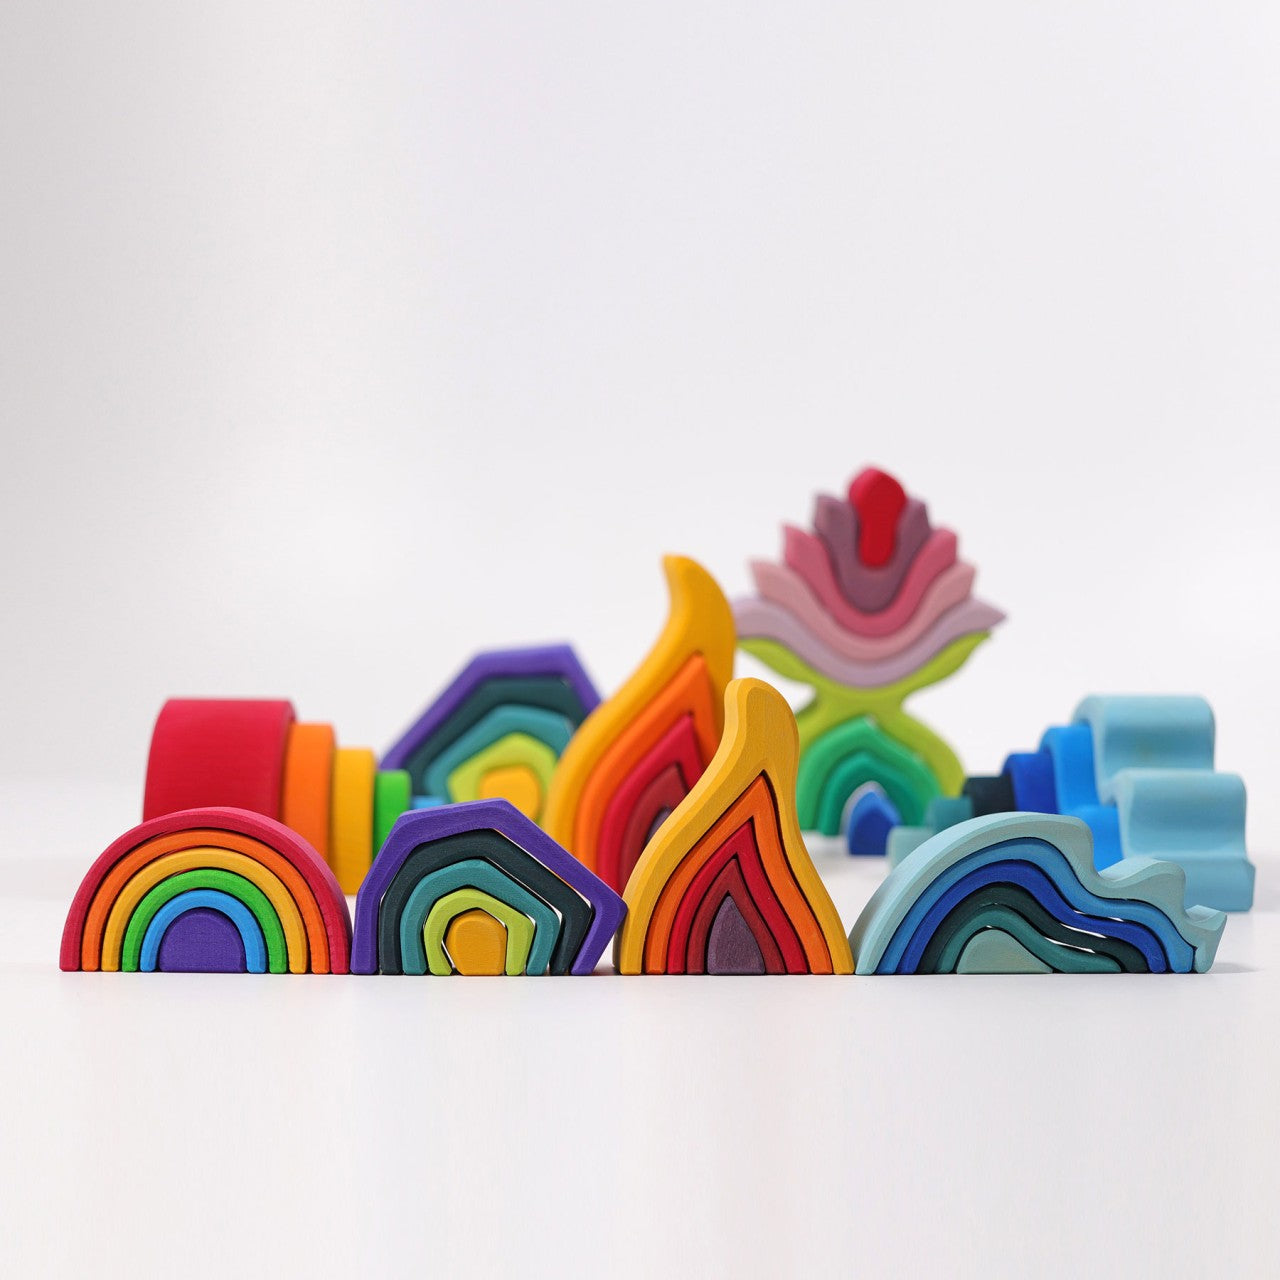 WaterWaves | 6 Pieces | Wooden Toys for Kids | Open-Ended Play